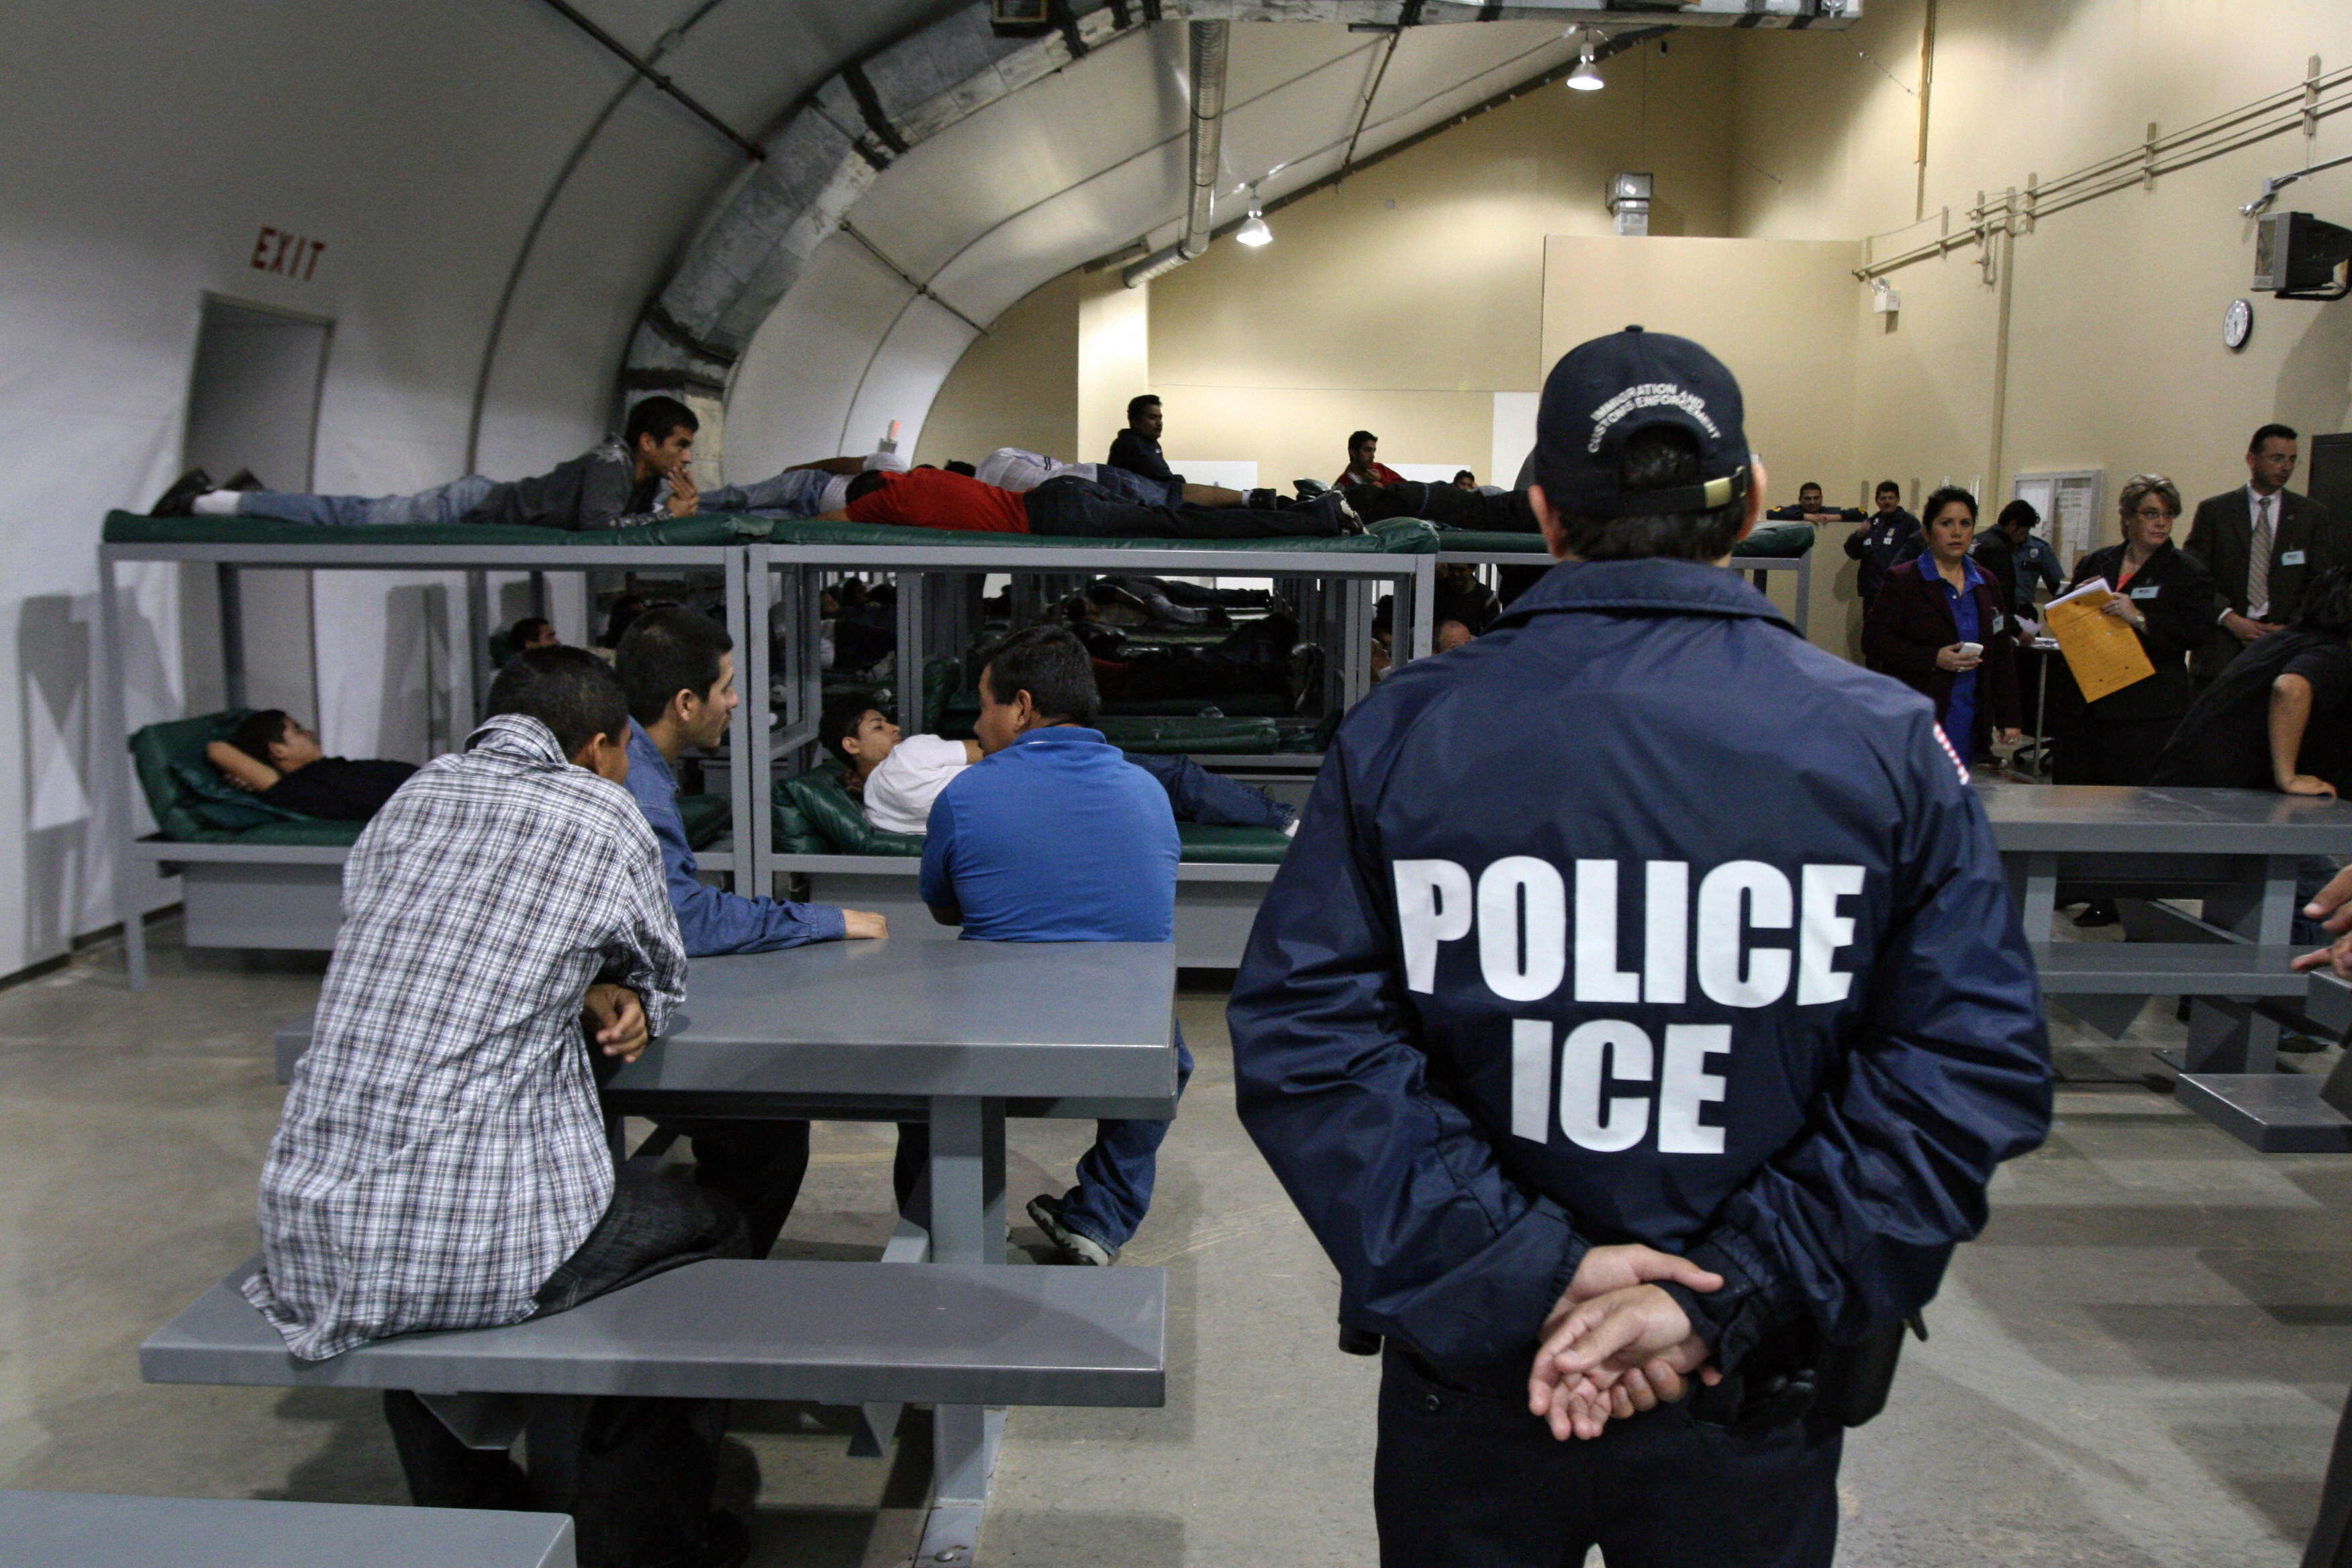 An Immigration and Customs Enforcement (ICE) officer guards a group of immigrations at a facility in Raymondsville, Texas, in 2008. (JOSE CABEZAS&mdash;AFP/Getty Images)